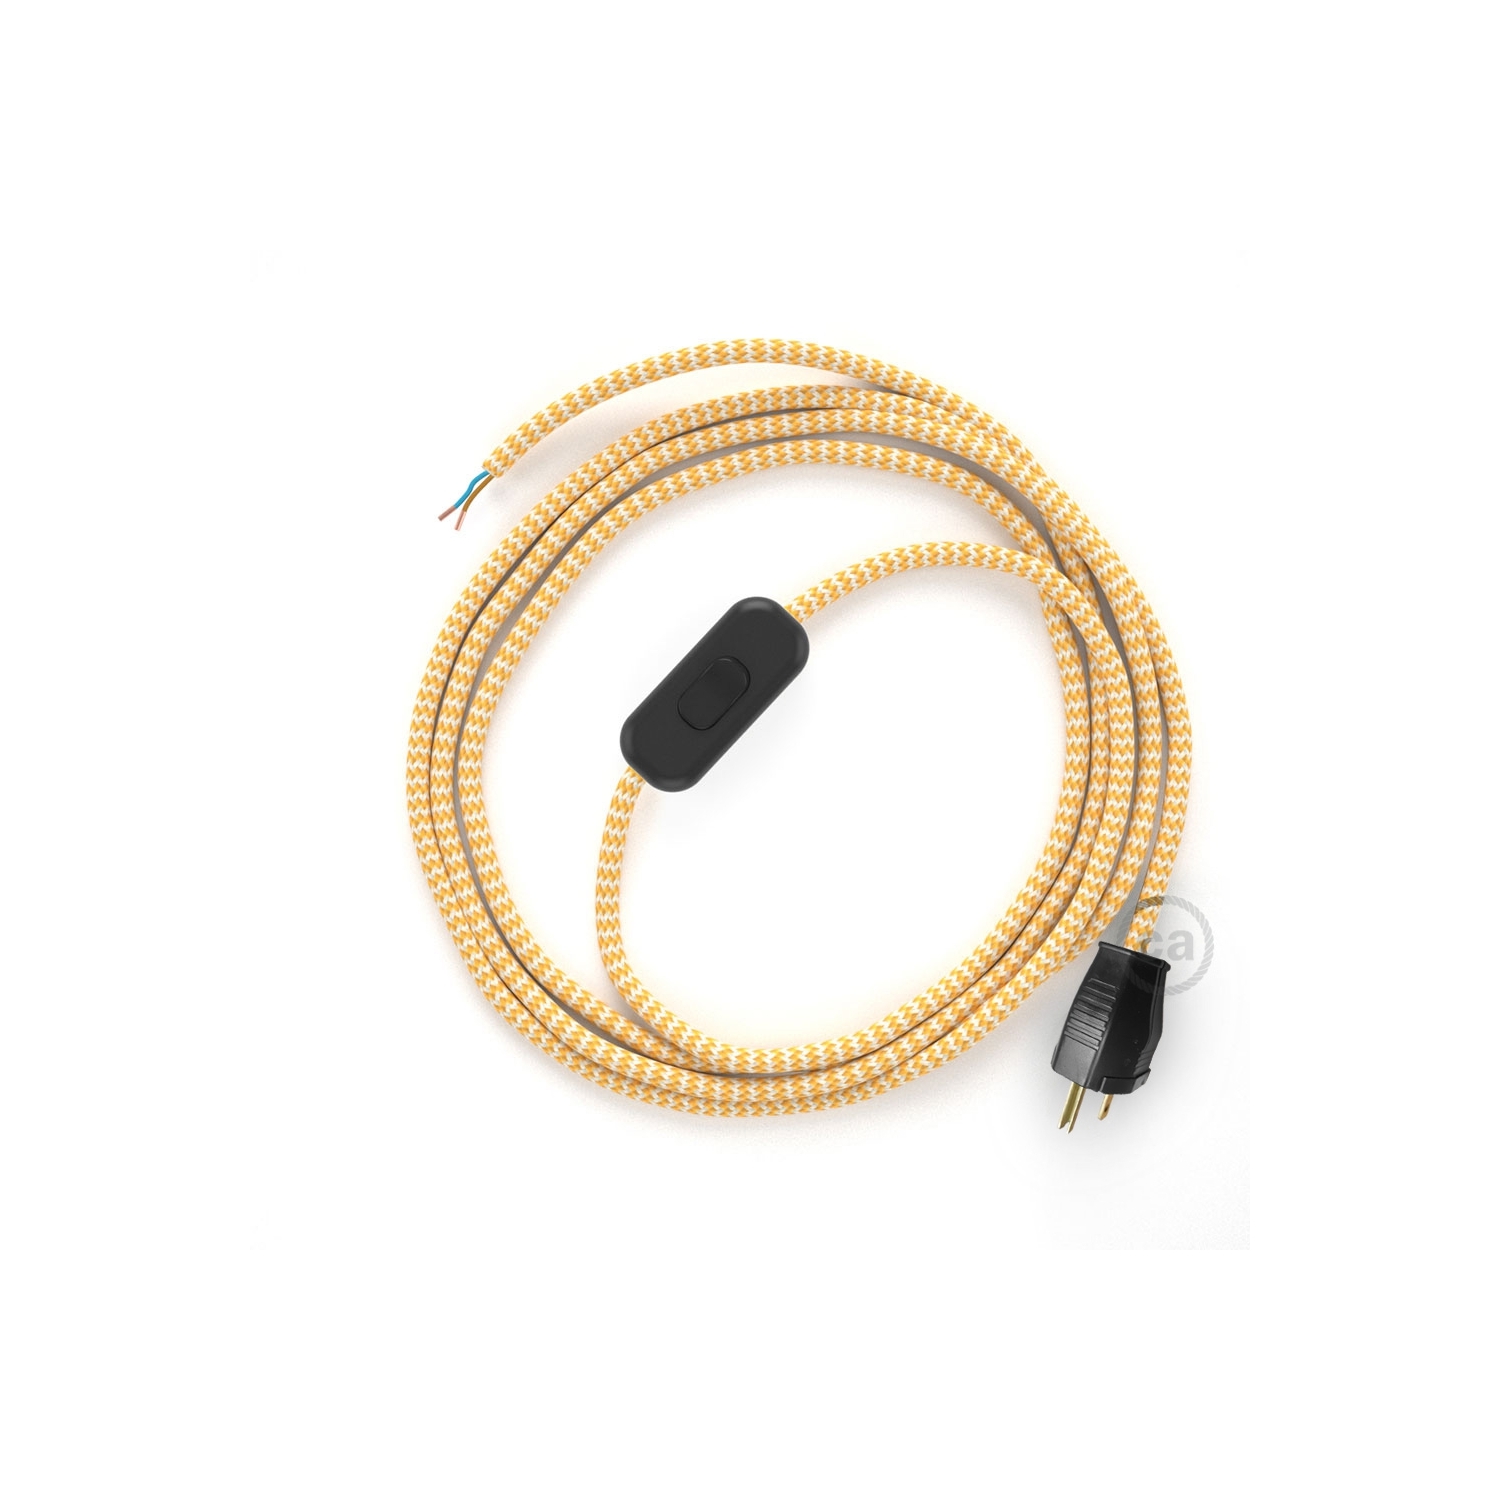 Power Cord with in-line switch, RZ10 Yellow & White Chevron - Choose color of switch/plug